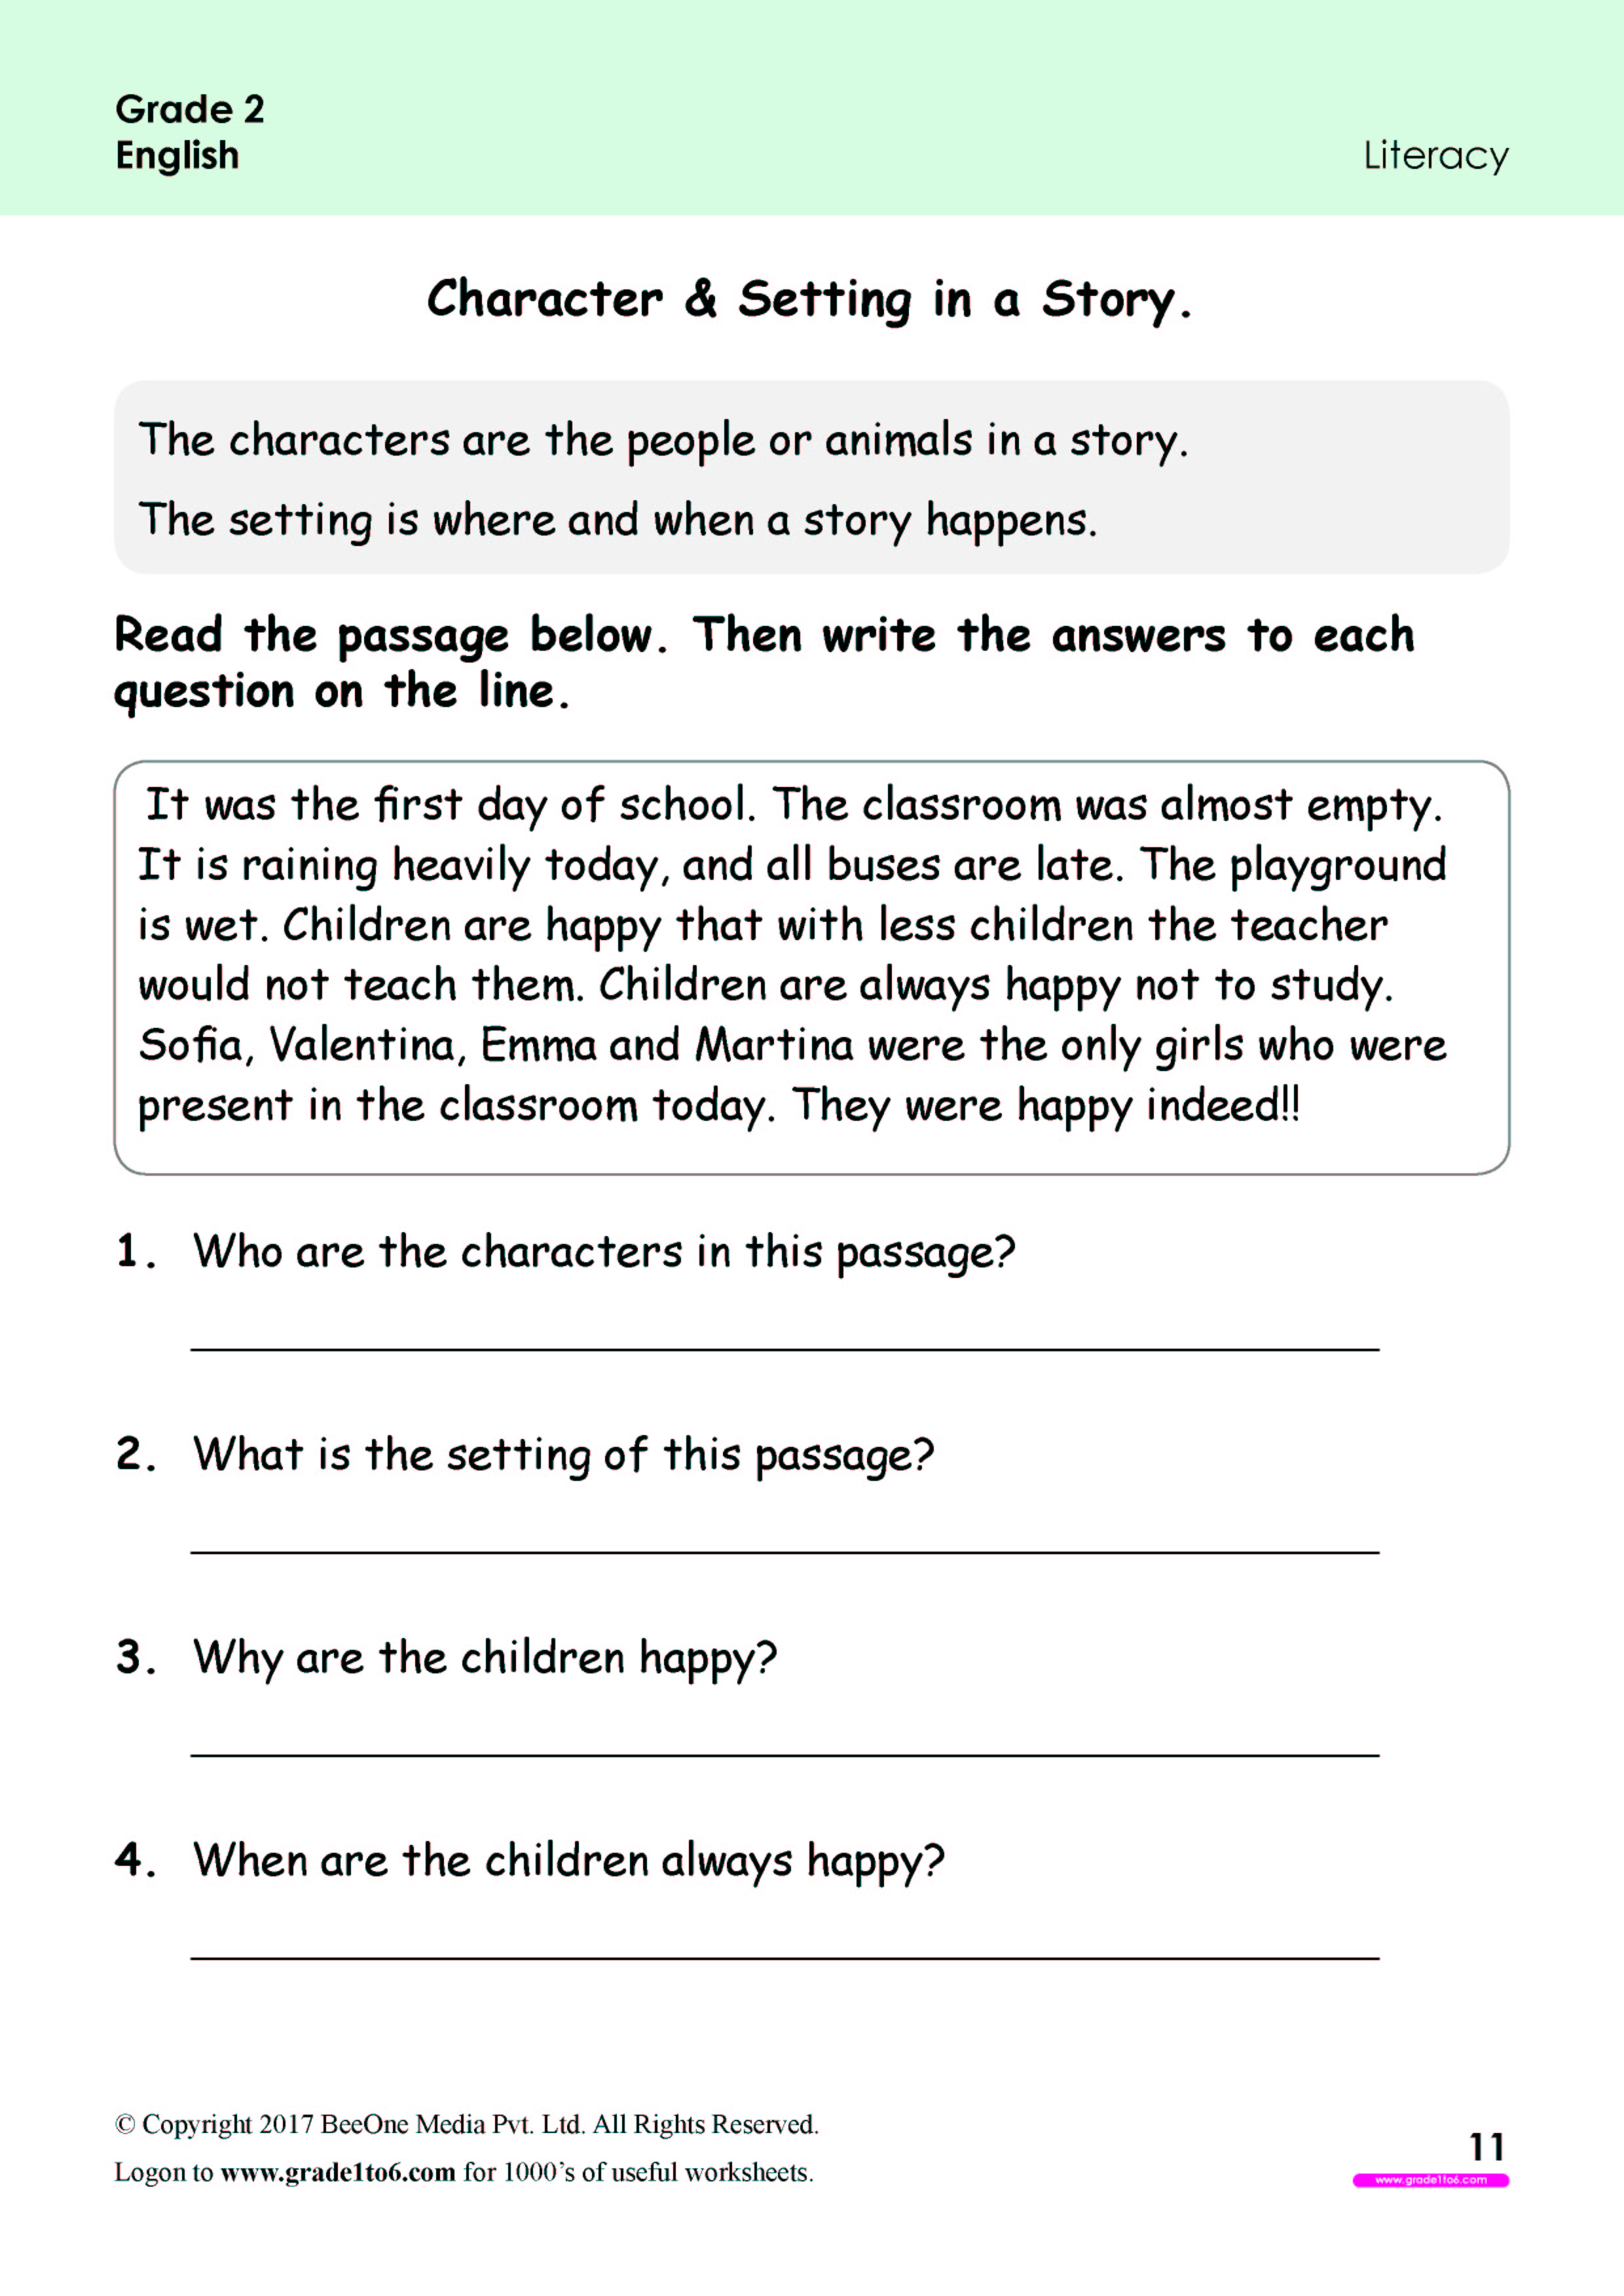 Character & Settings in a story Worksheets|www.grade1to6.com